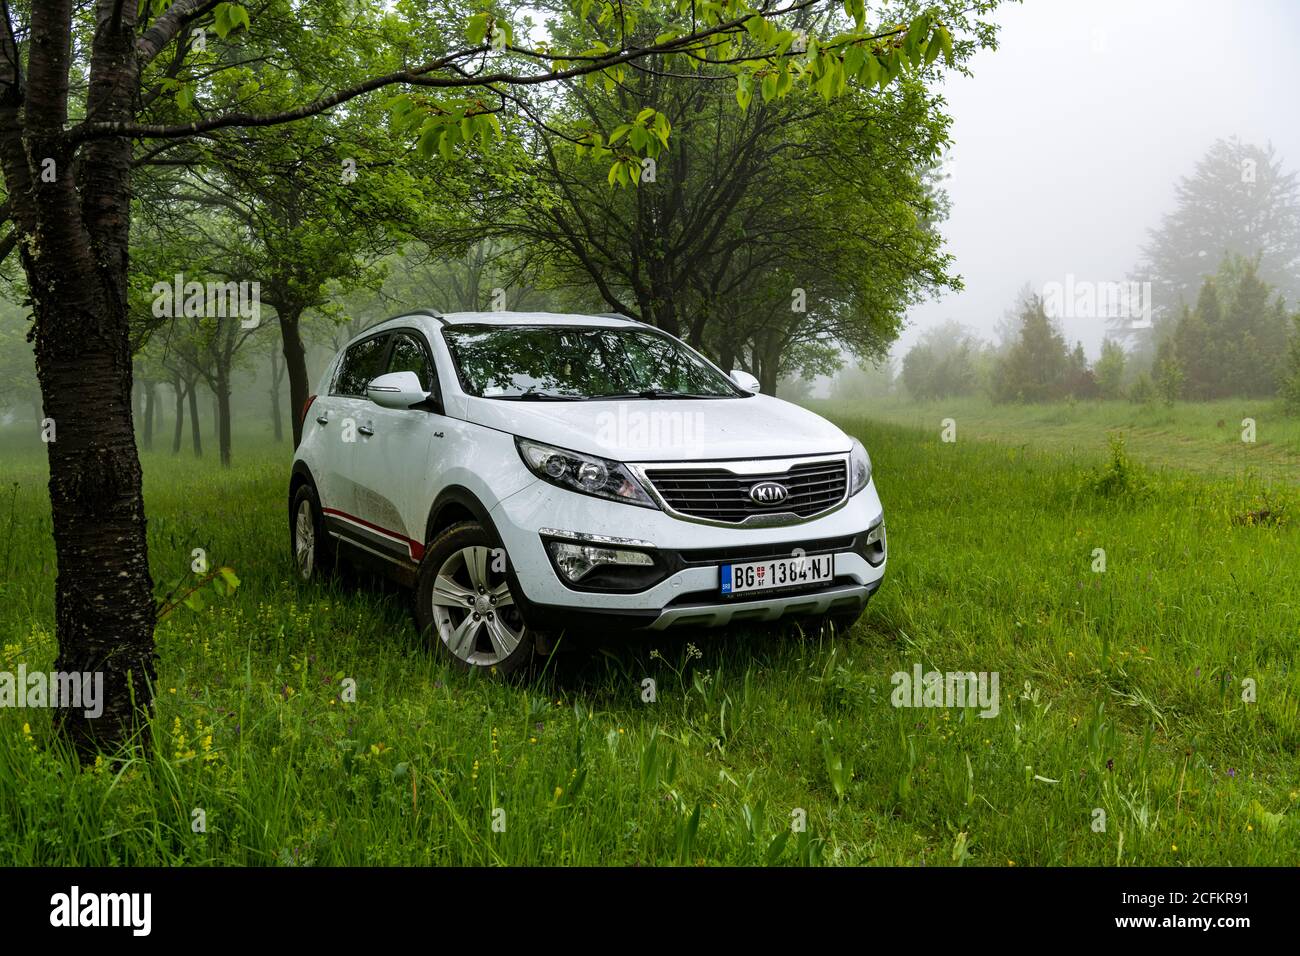 Kia Sportage 2.0 CRDI awd or 4x4, on the dirth road, in deep forest, beautiful car landscape, full of trees and green grass. Crossover testing. Stock Photo